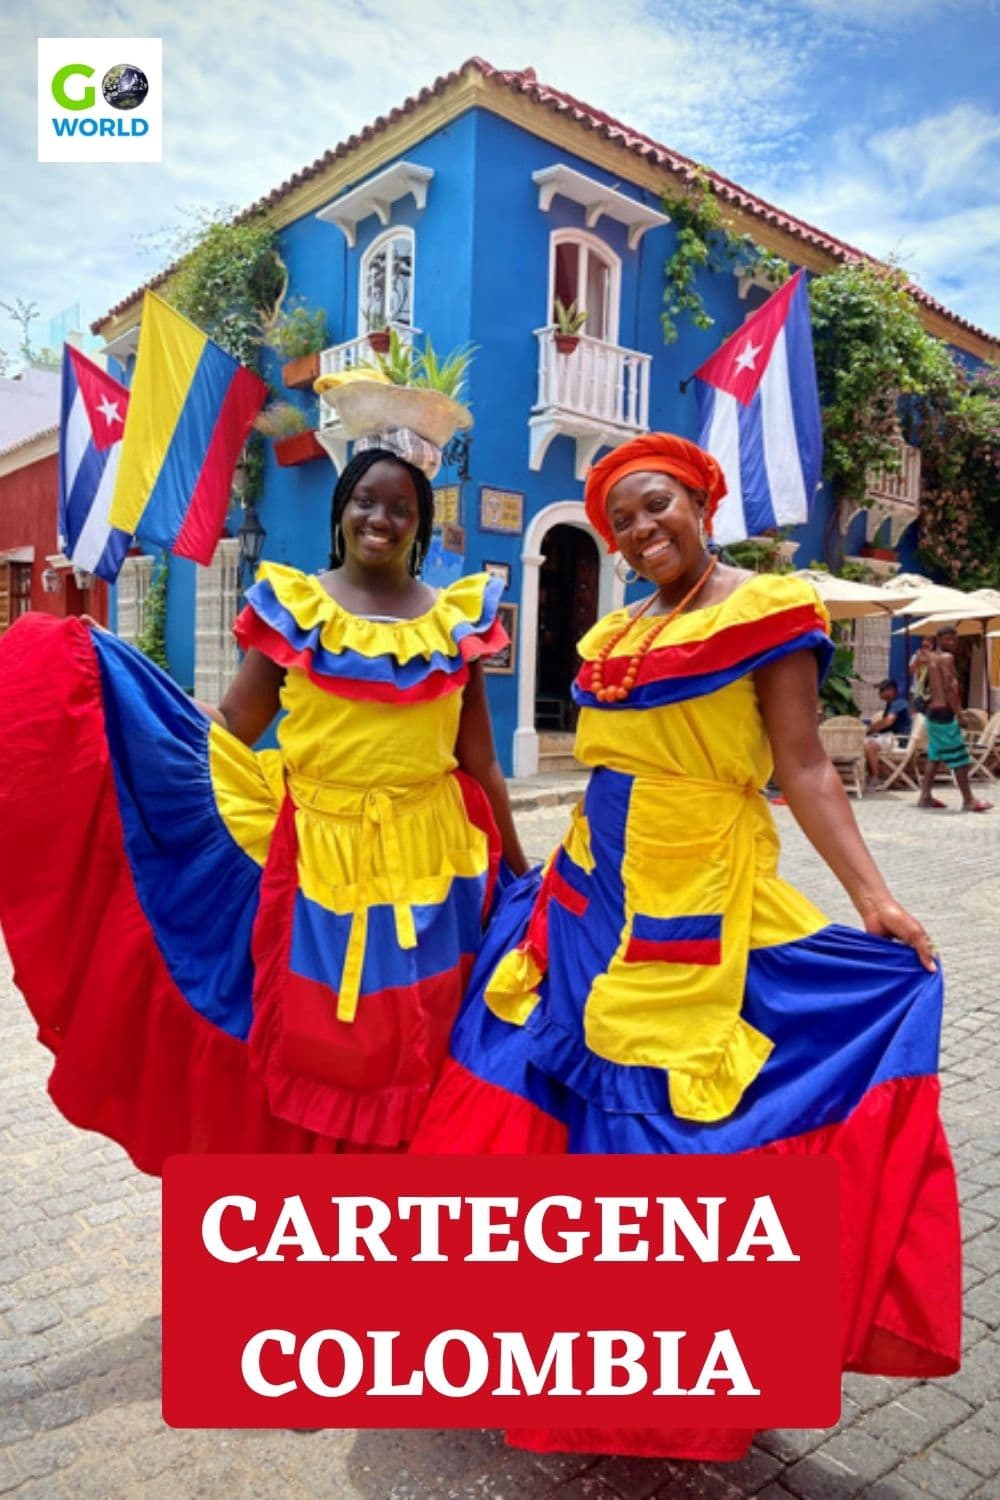 Colorful Cartagena.  Women in traditional outfits will pose for $1 along the pastel colored streets